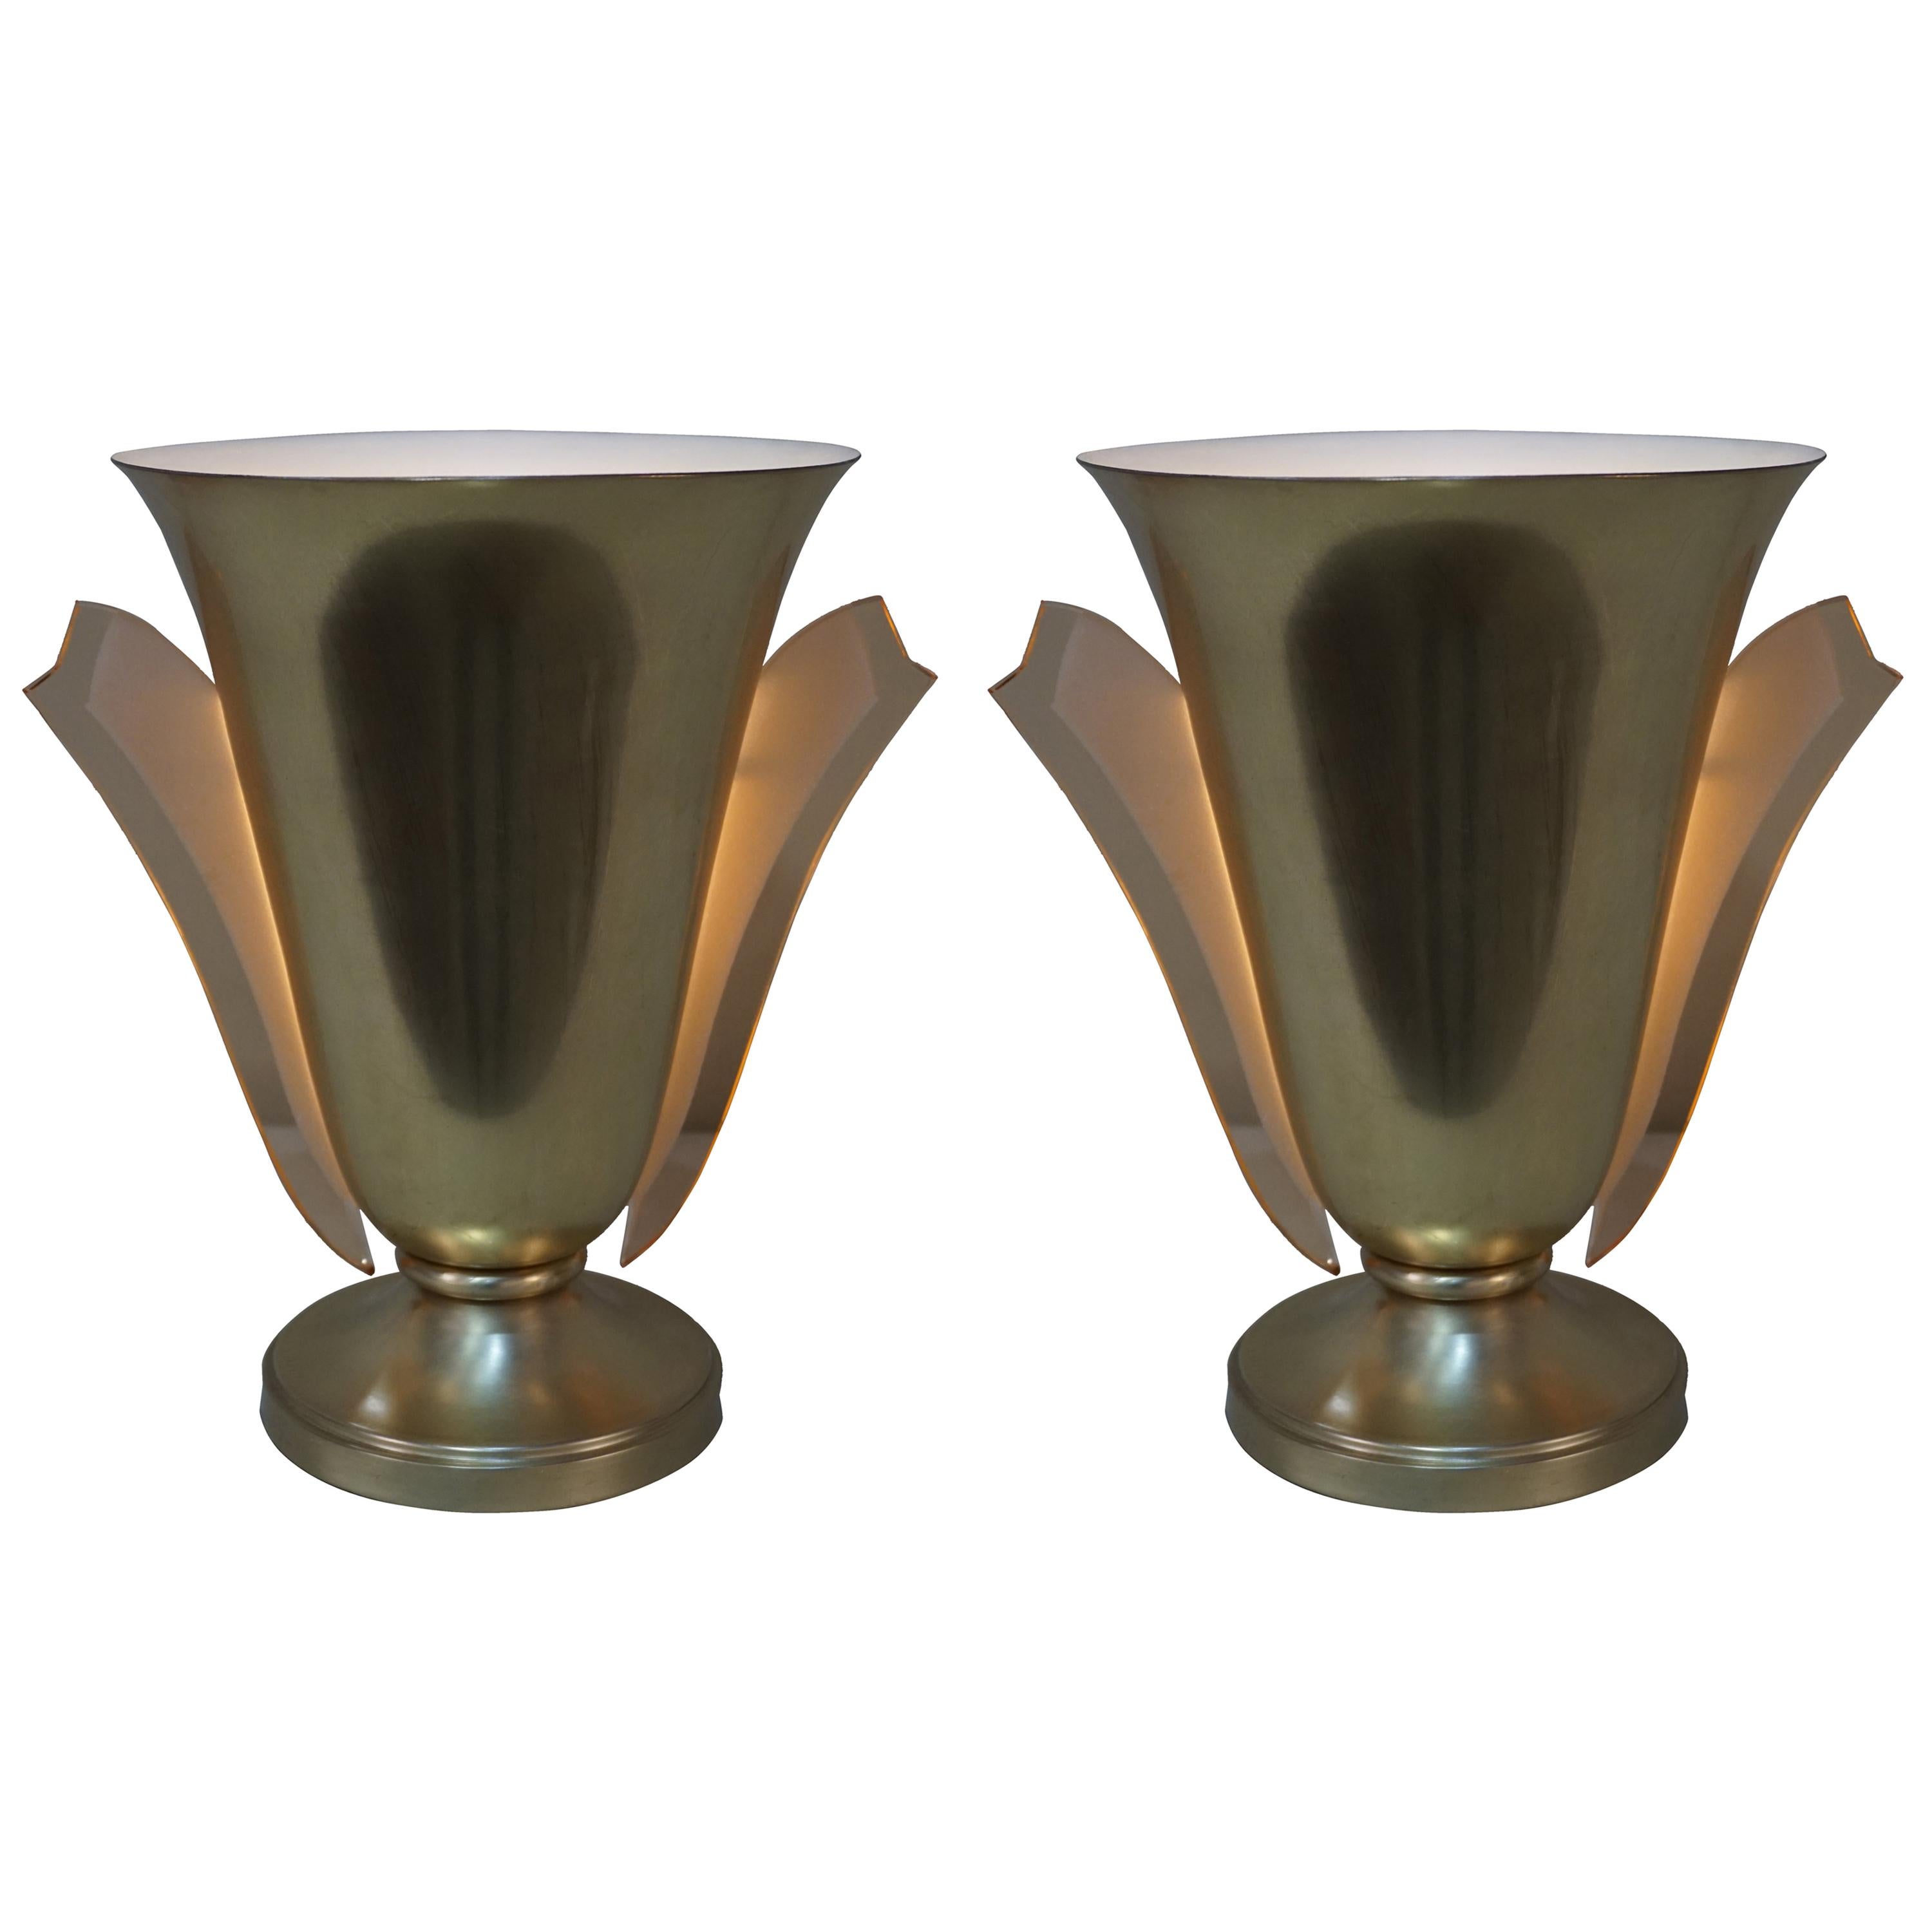 Pair of Bronze Torchiere Table Lamps by Petitot